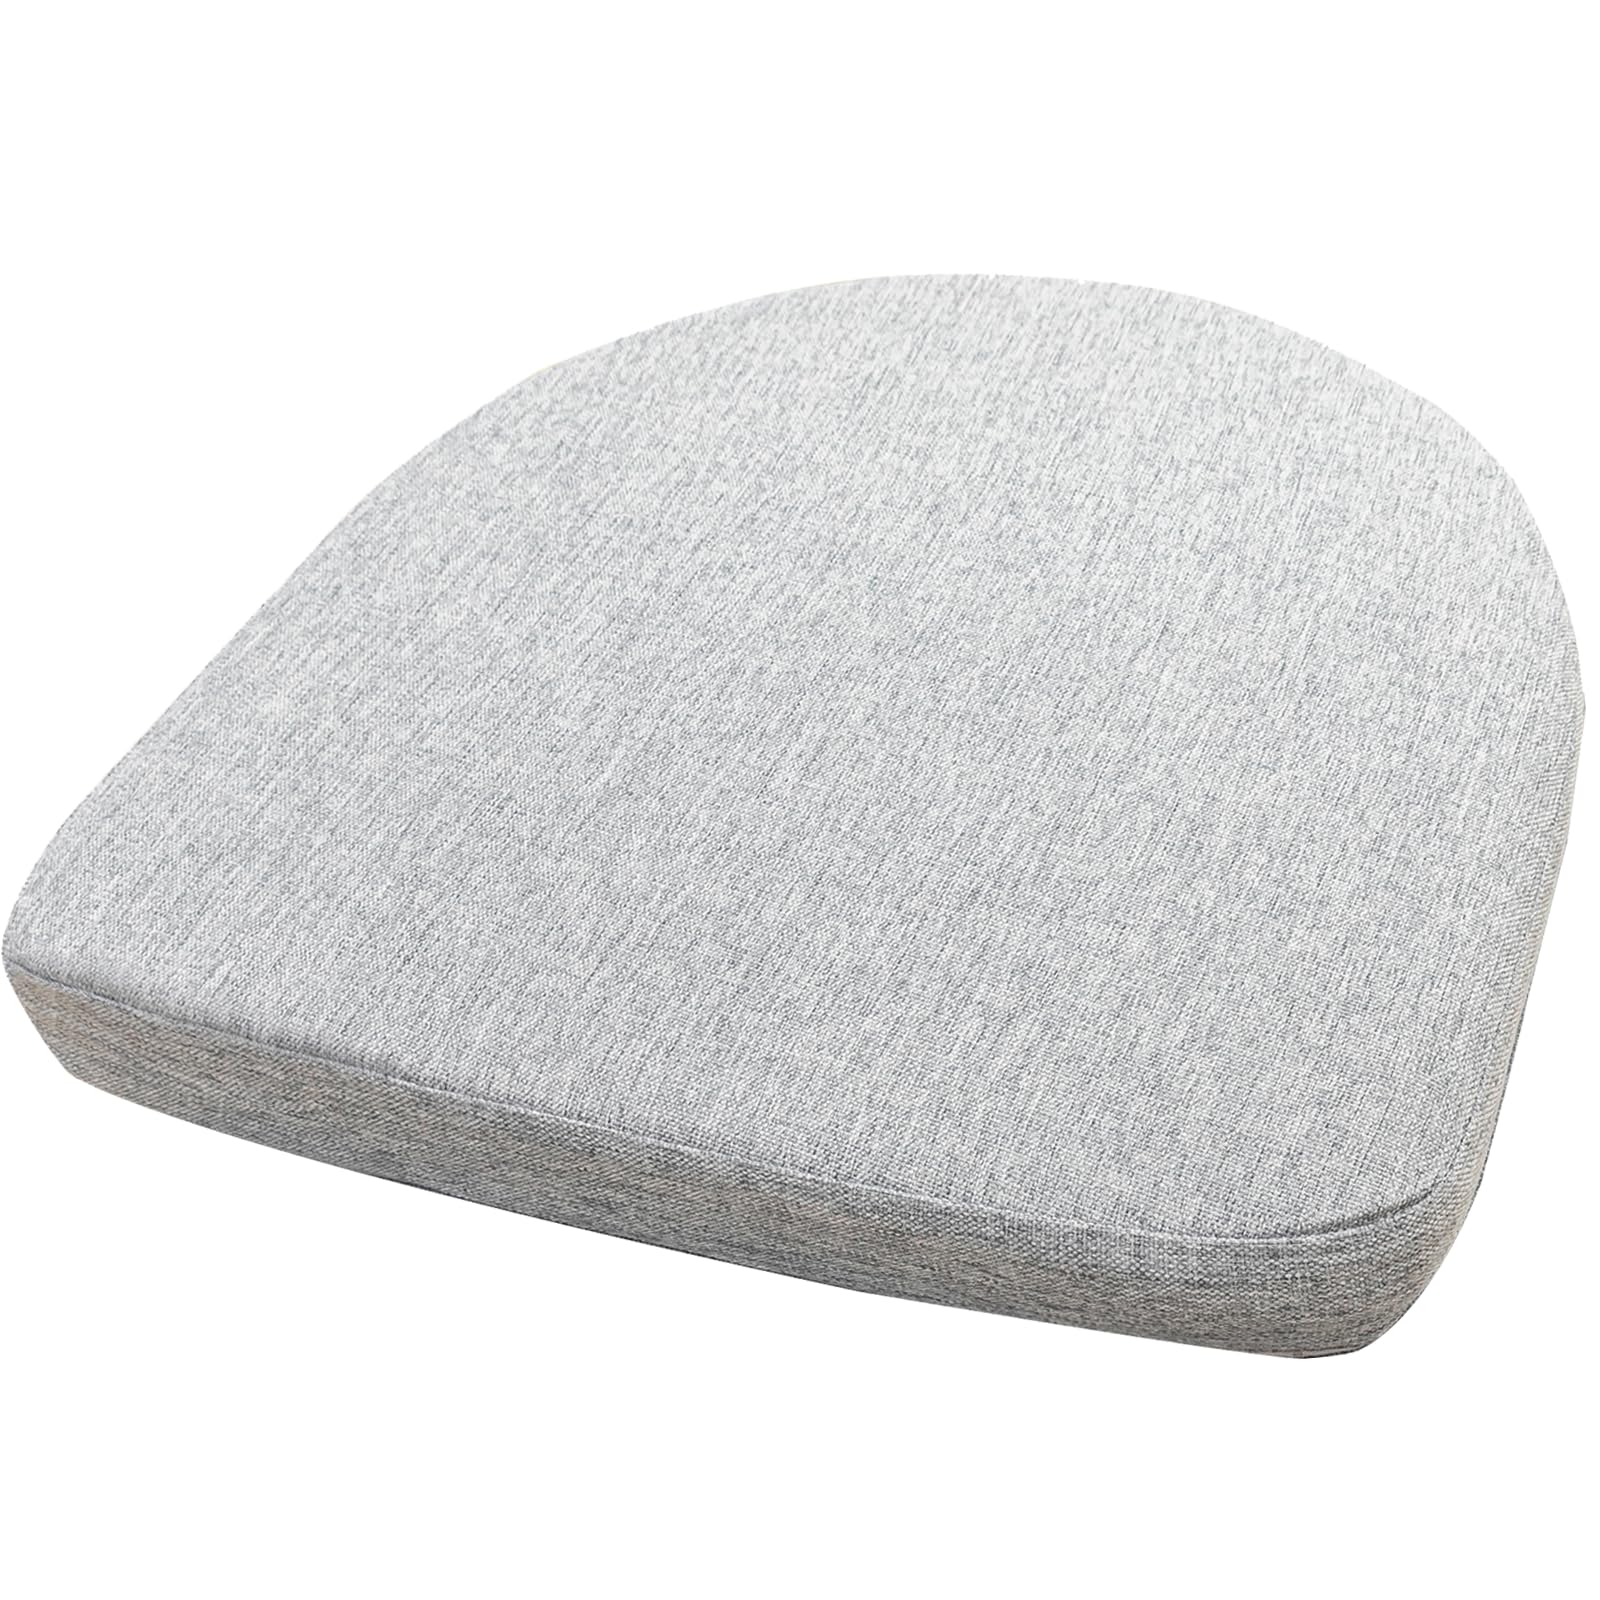 Eiury Kitchen Chair Cushion - 17"x16.5" Indoor Chair Pad with Ties for Dining Chairs - Non-Slip U-Shaped Rubber Back - Machine Washable Seat Cover - Grey